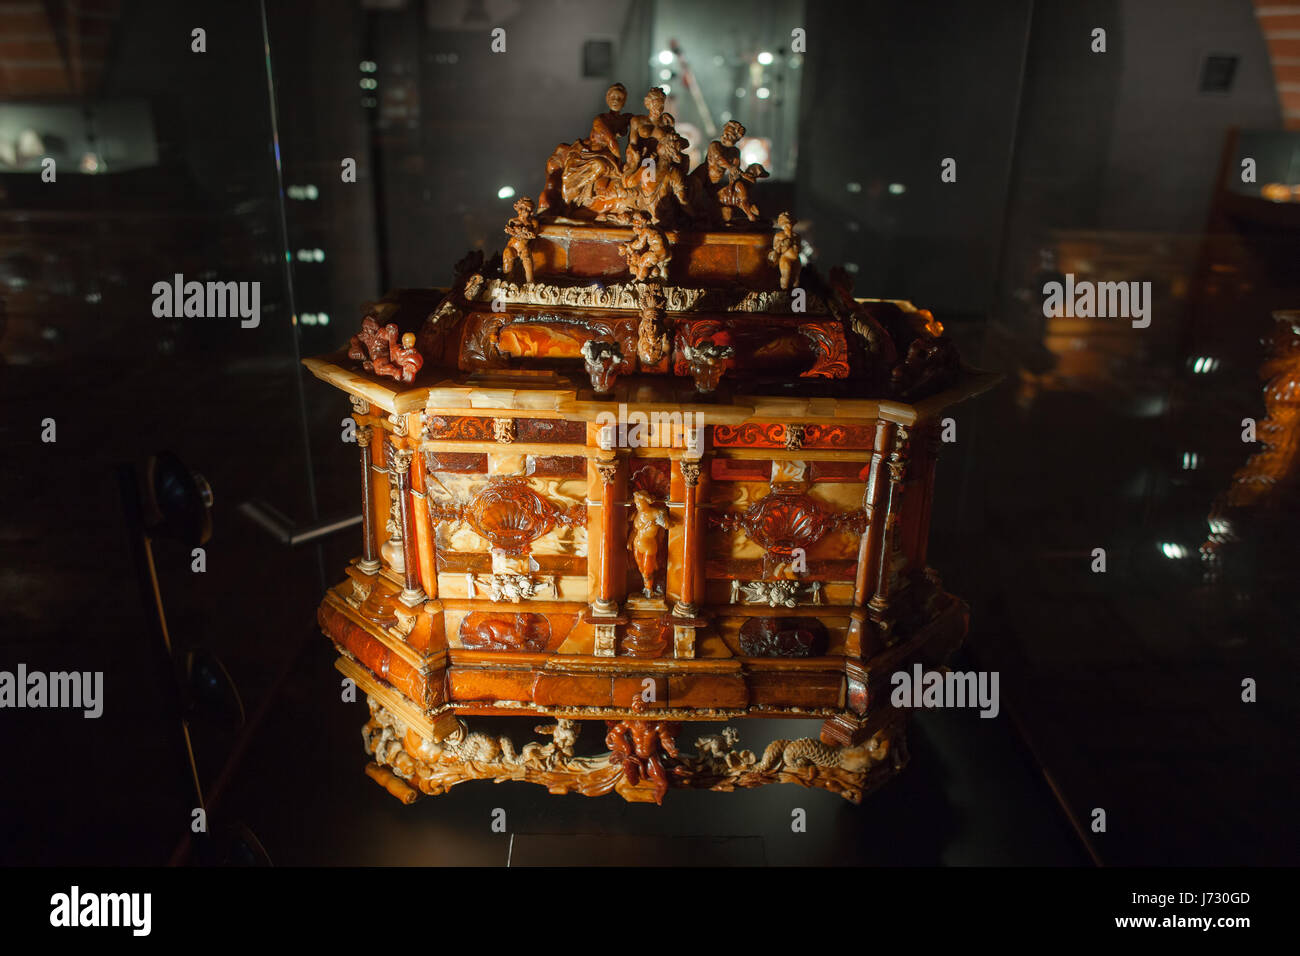 Amber casket masterpiece of Christopher Maucher, circa 1700, part of amber collection exhibition in Malbork Castle museum, Poland, Europe Stock Photo